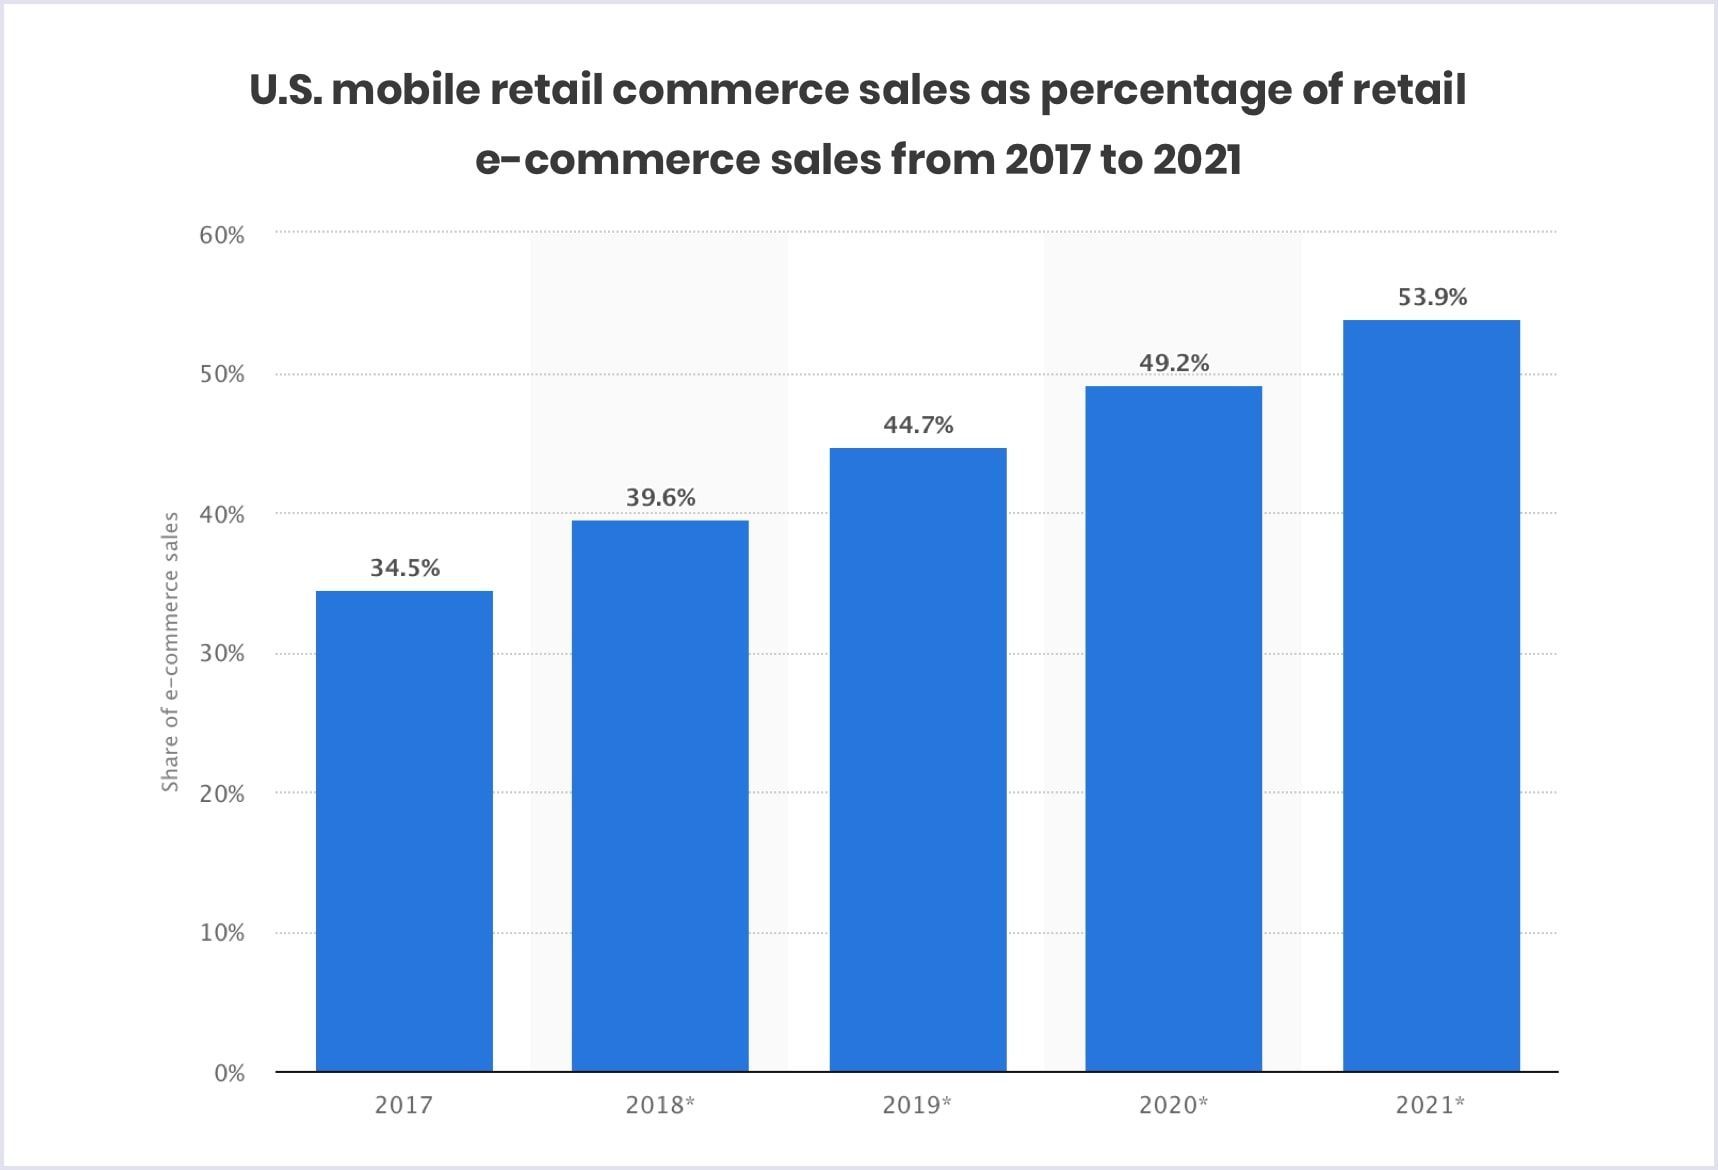 The rise of U.S mobile retail commerce sales from 2017 to 2021